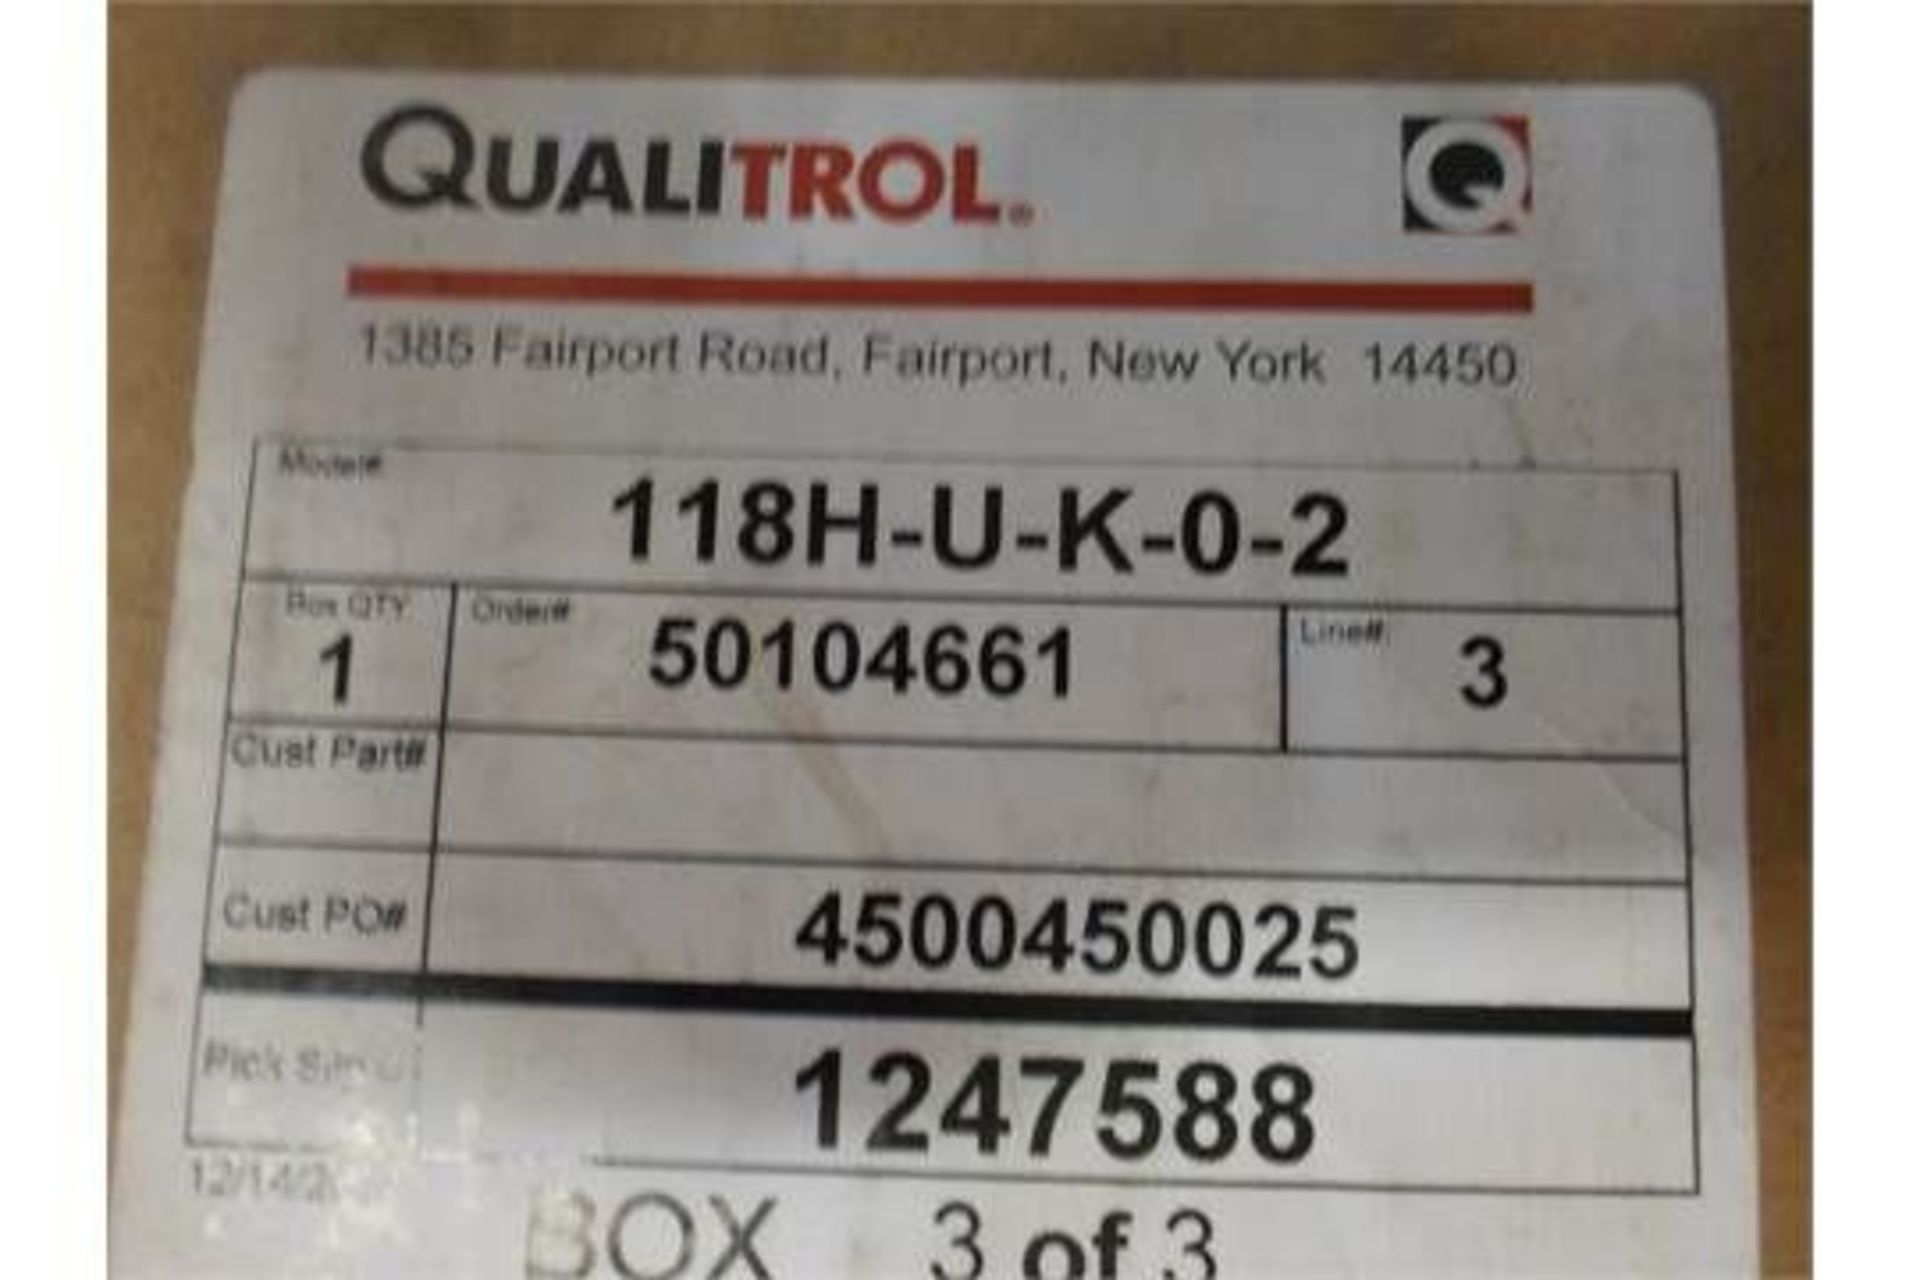 LOT OF TWO QUALITROL 118H-120-K-4-2 ELECTRONIC MONITOR TEMPERATURE CONTROLLER B457313 ONE IN EACH B - Image 3 of 3